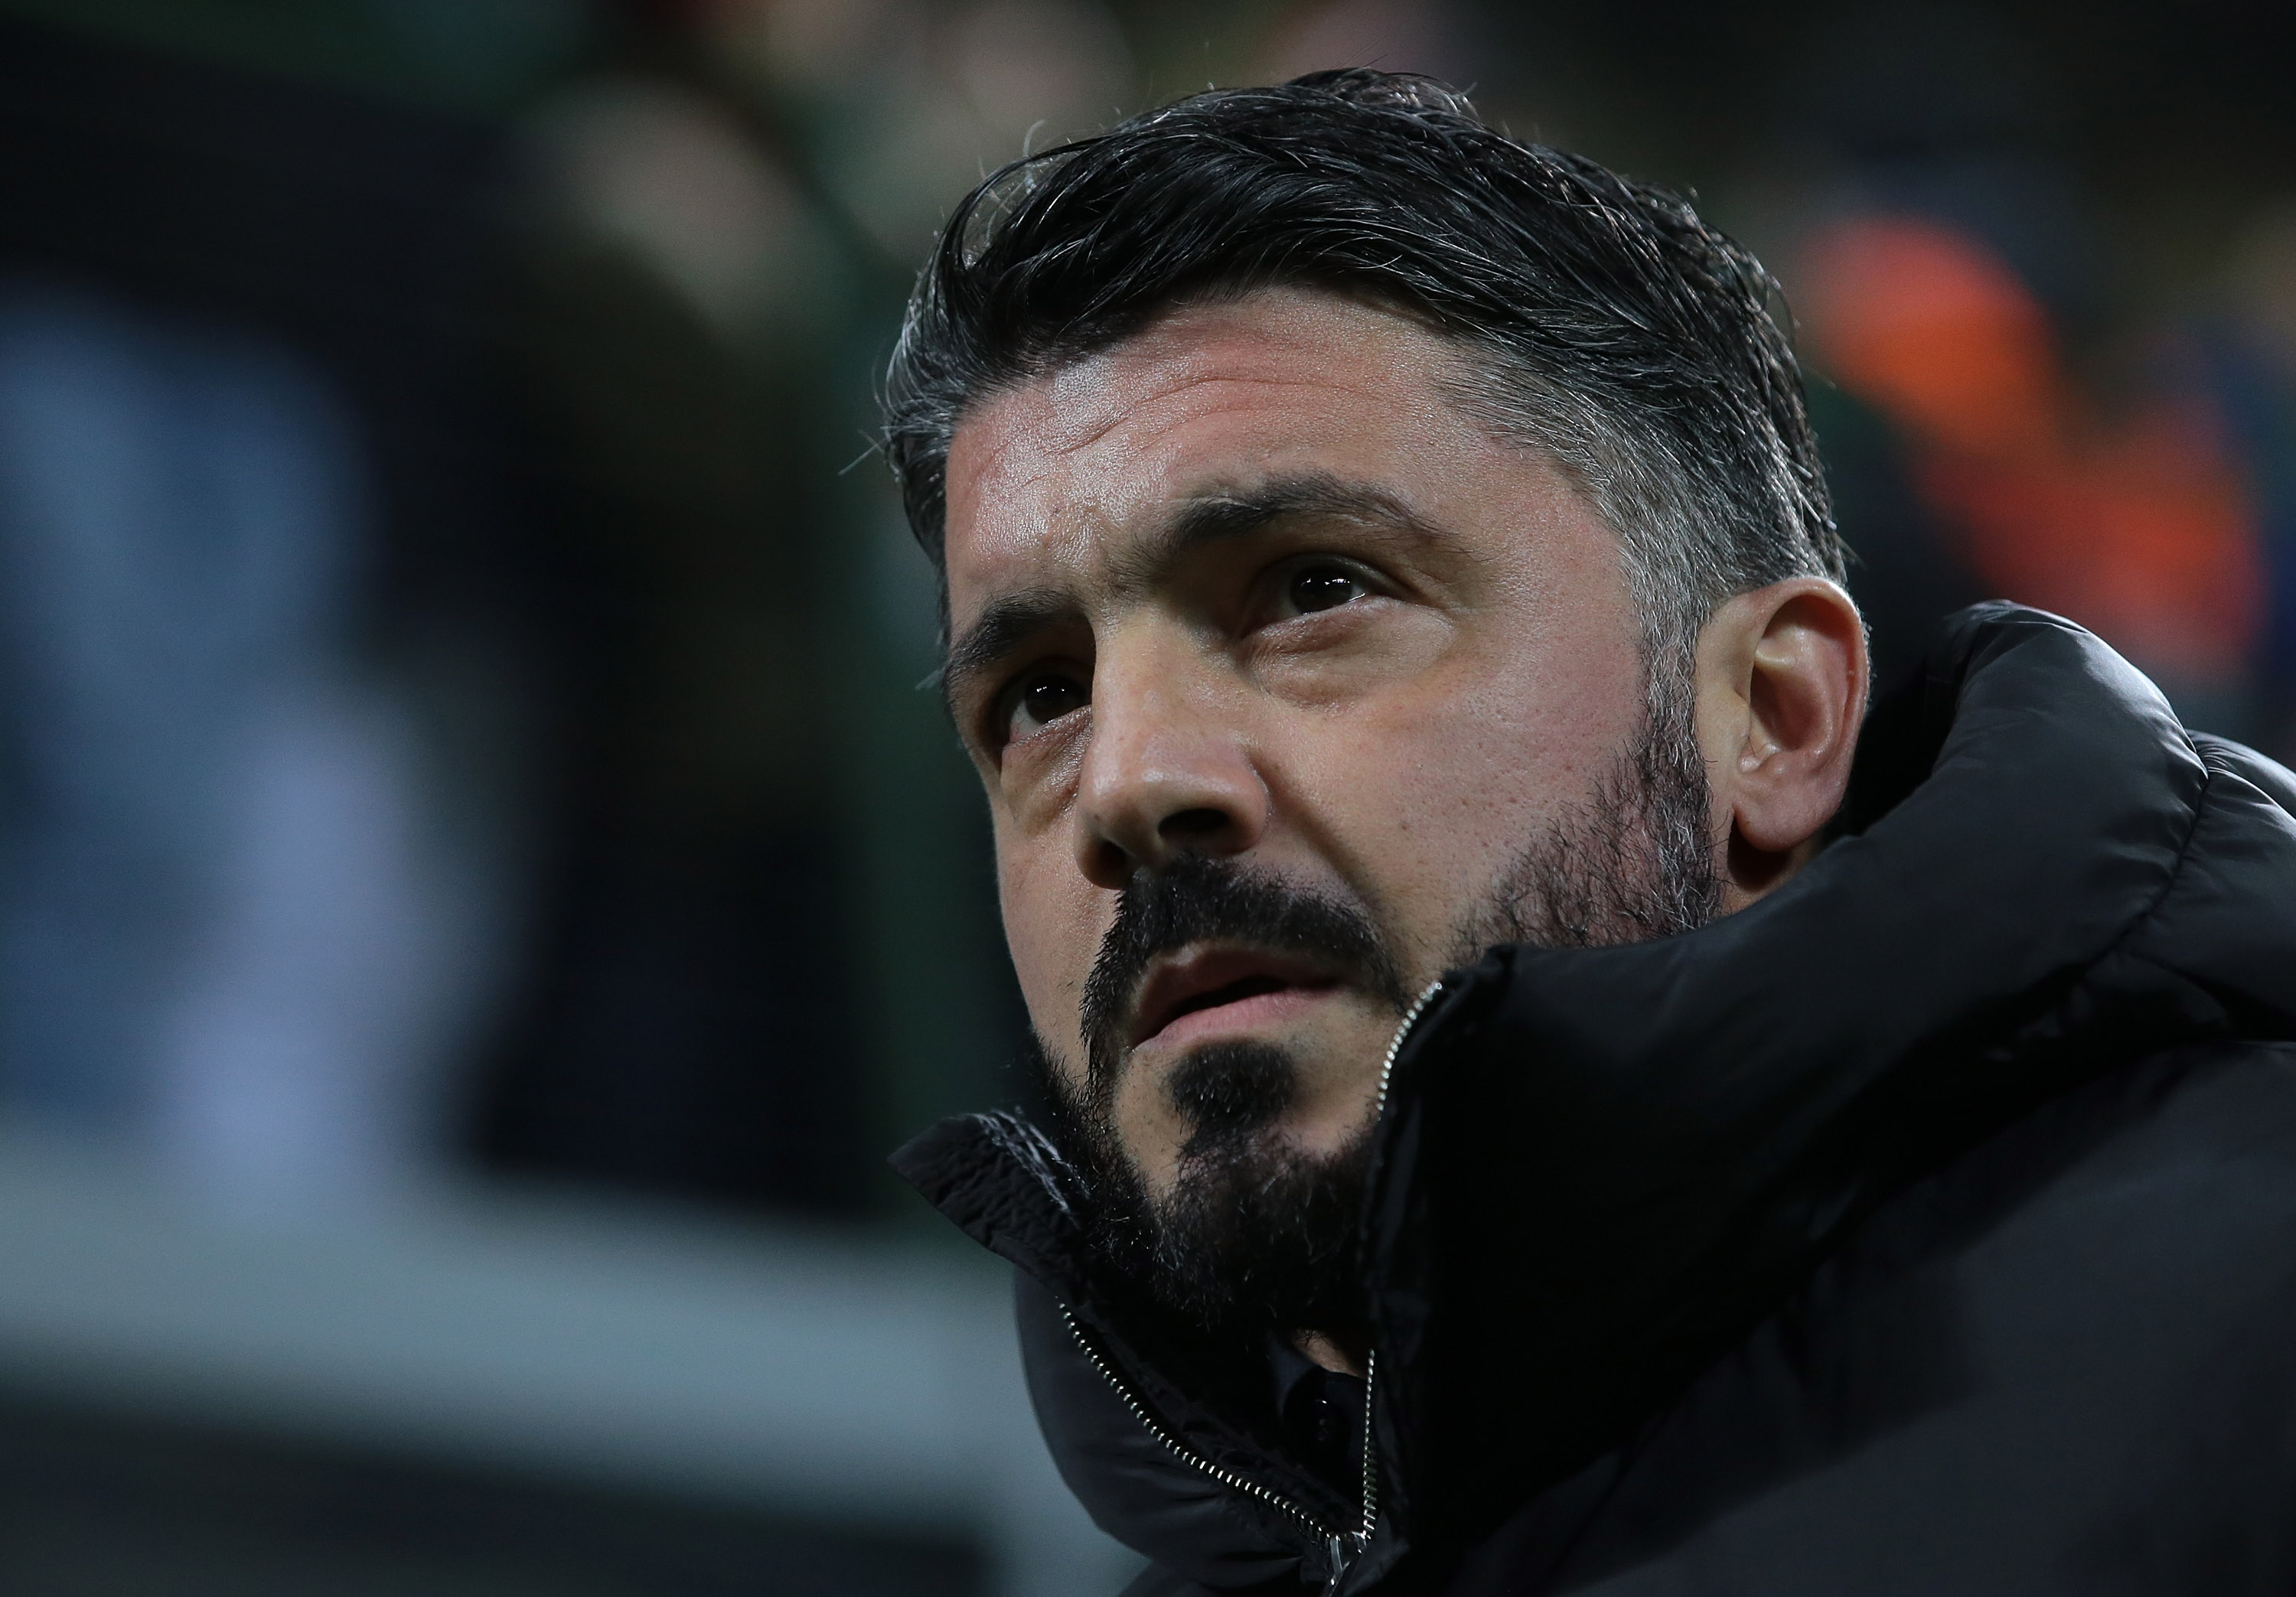 MILAN, ITALY - NOVEMBER 29:  AC Milan coach Ivan Gennaro Gattuso looks on during the UEFA Europa League Group F match between AC Milan and F91 Dudelange at Stadio Giuseppe Meazza on November 29, 2018 in Milan, Italy.  (Photo by Emilio Andreoli/Getty Images)